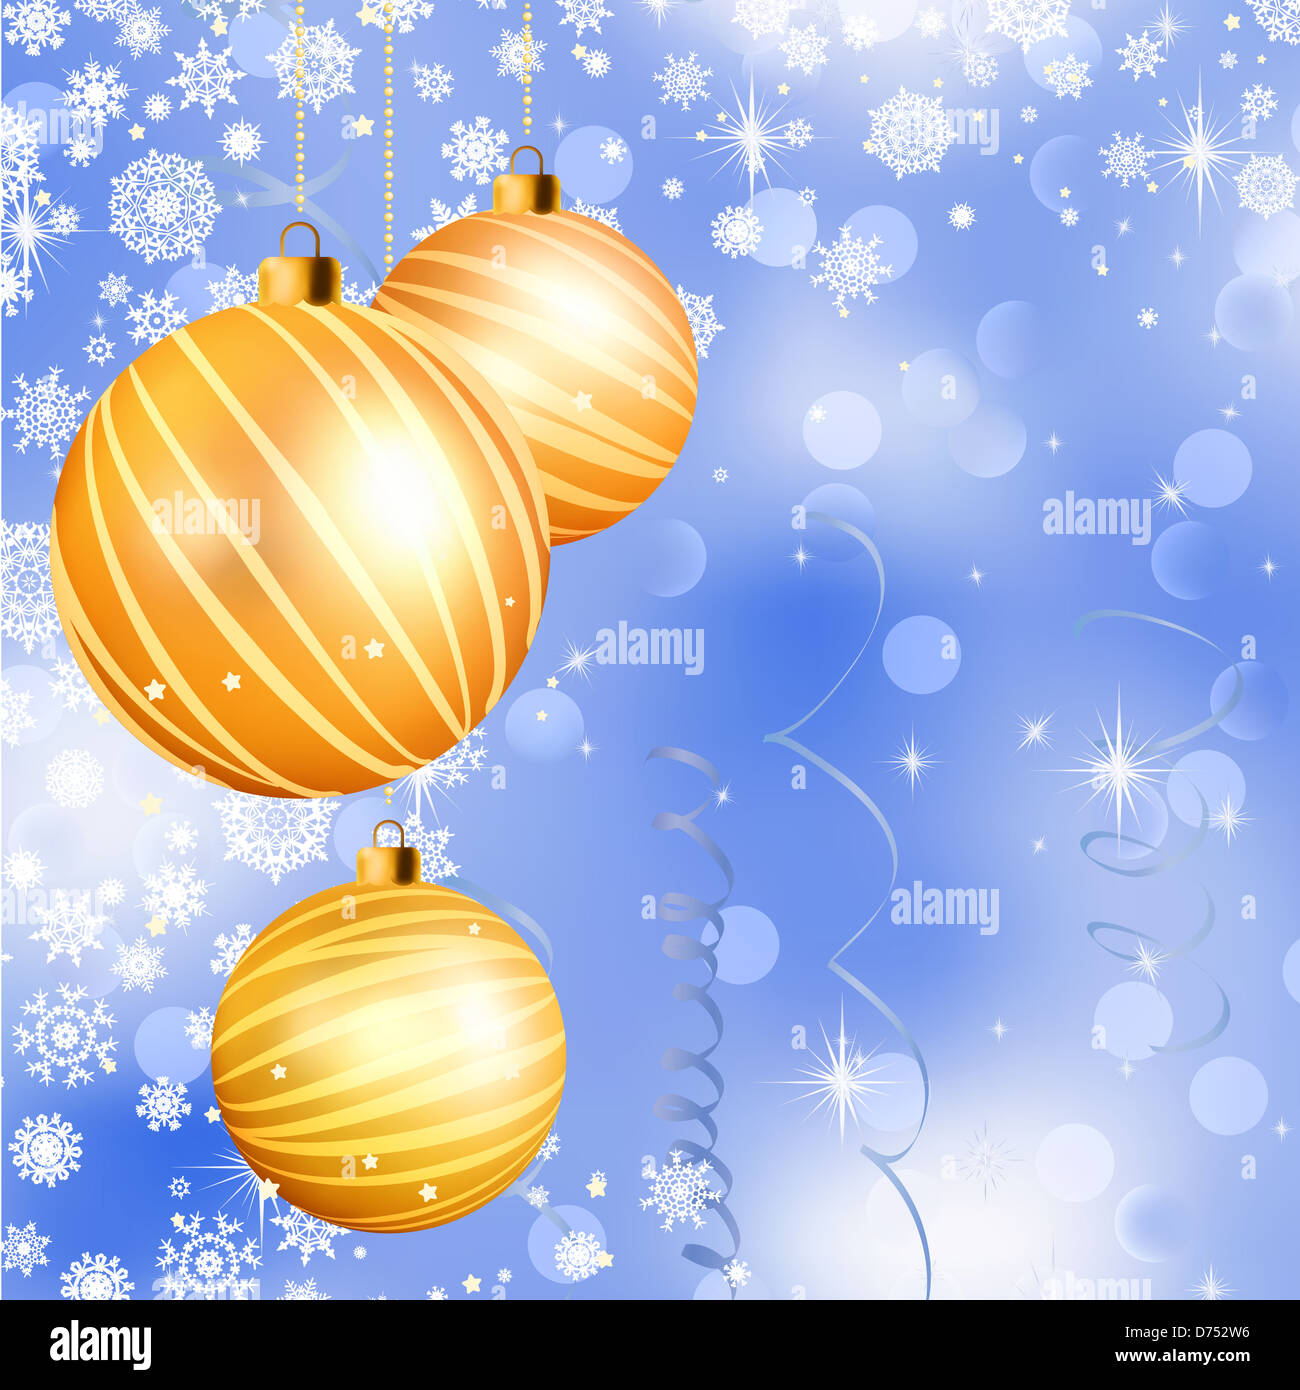 Christmas ball on abstract blue lights background Stock Photo